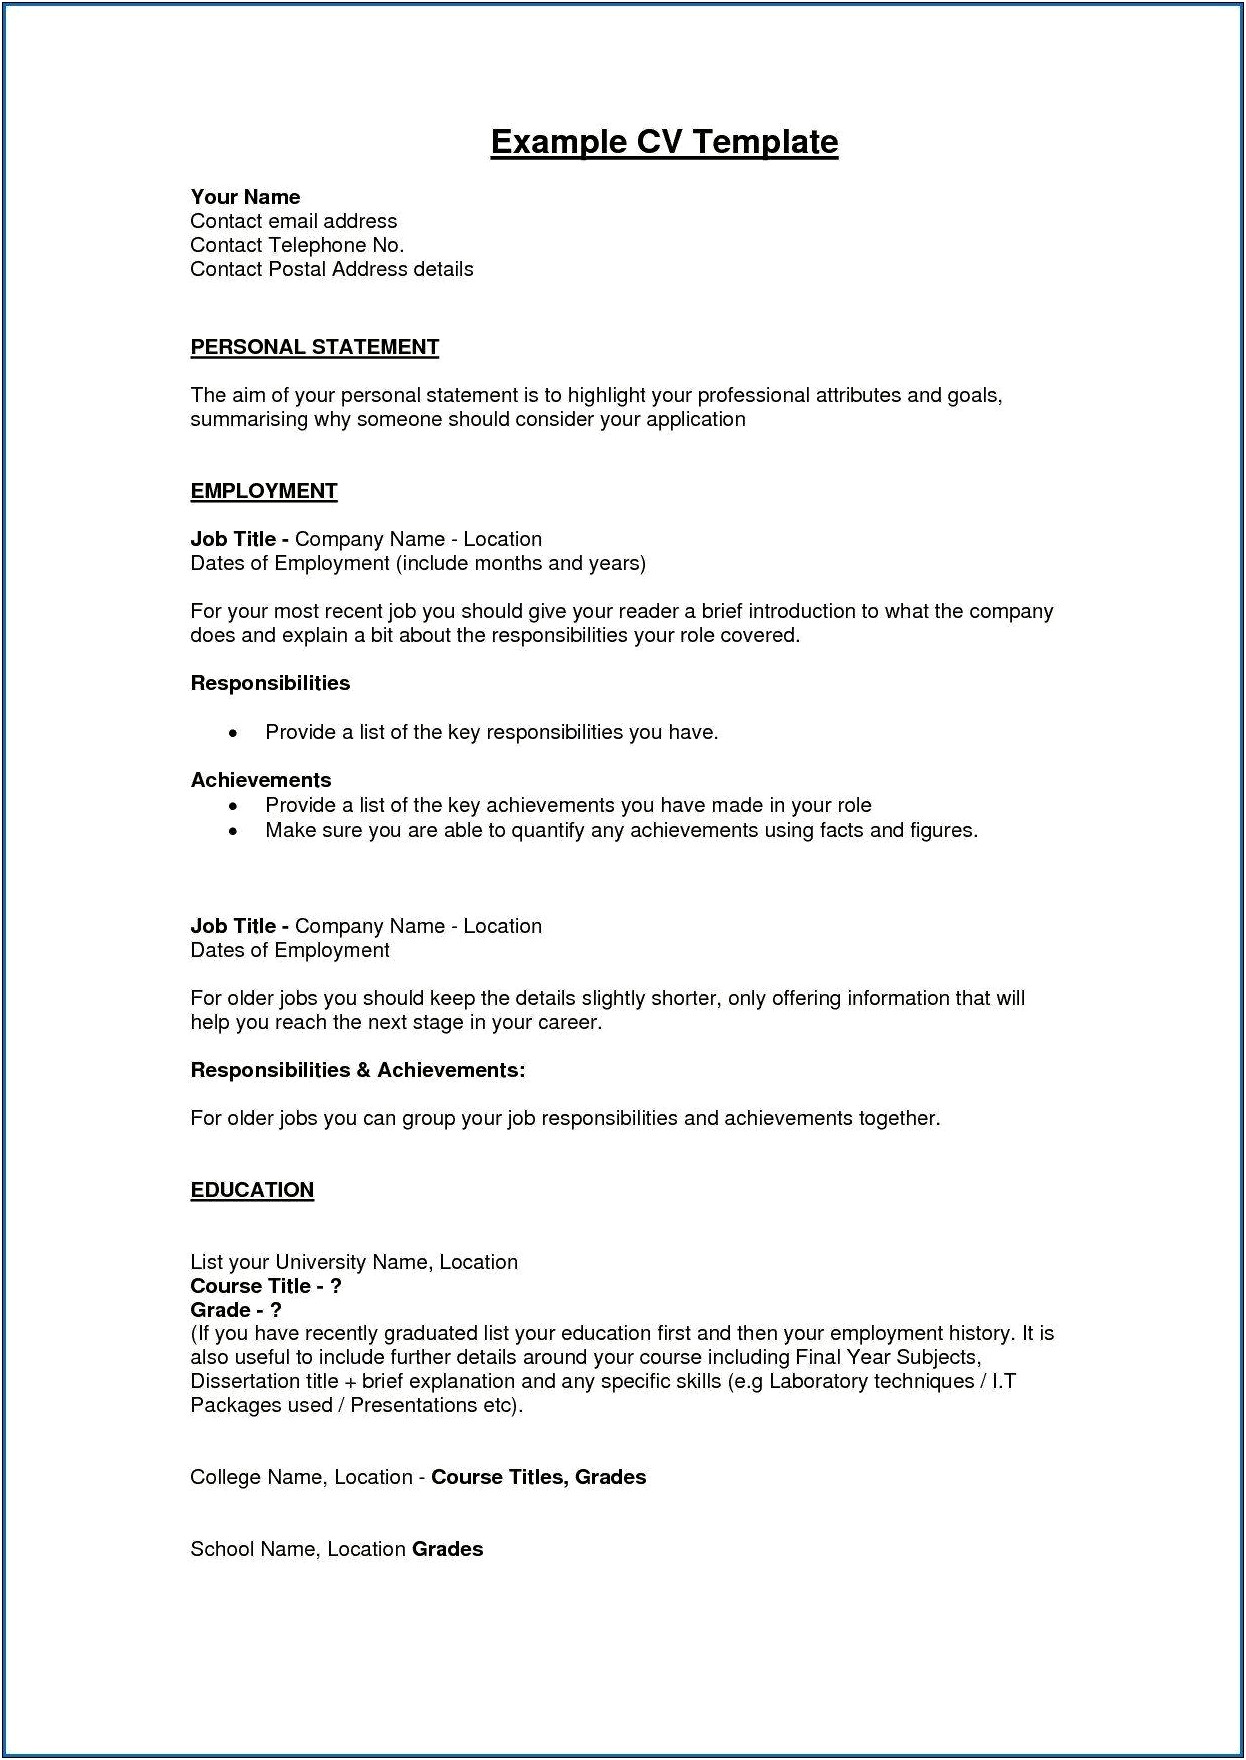 Resume Profile Examples High School Student